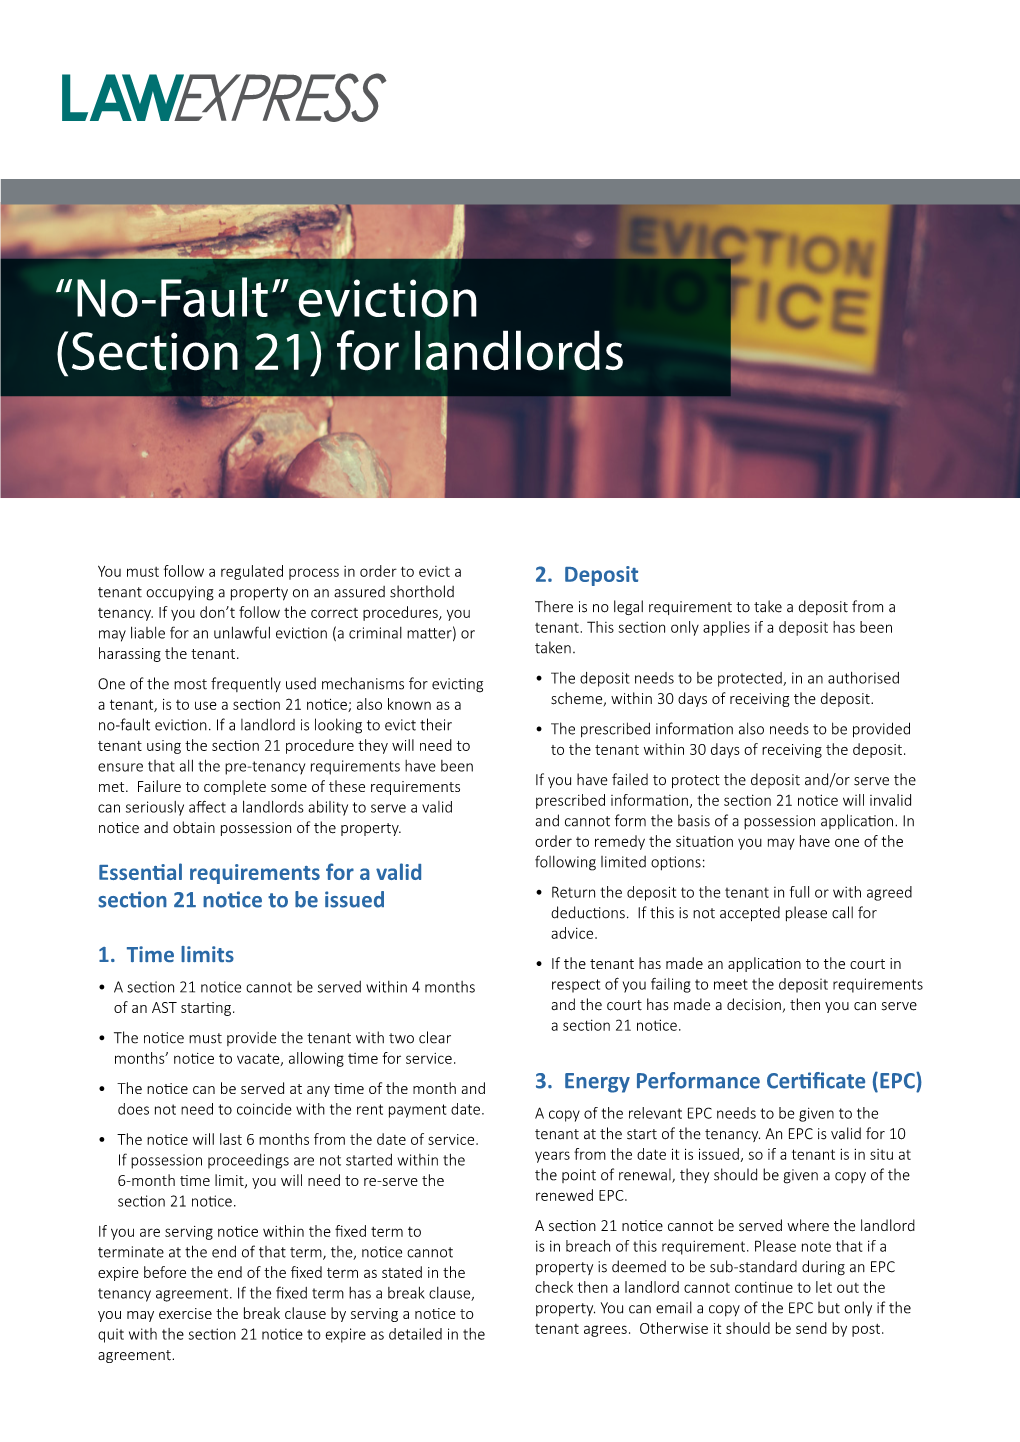 “No-Fault” Eviction (Section 21) for Landlords